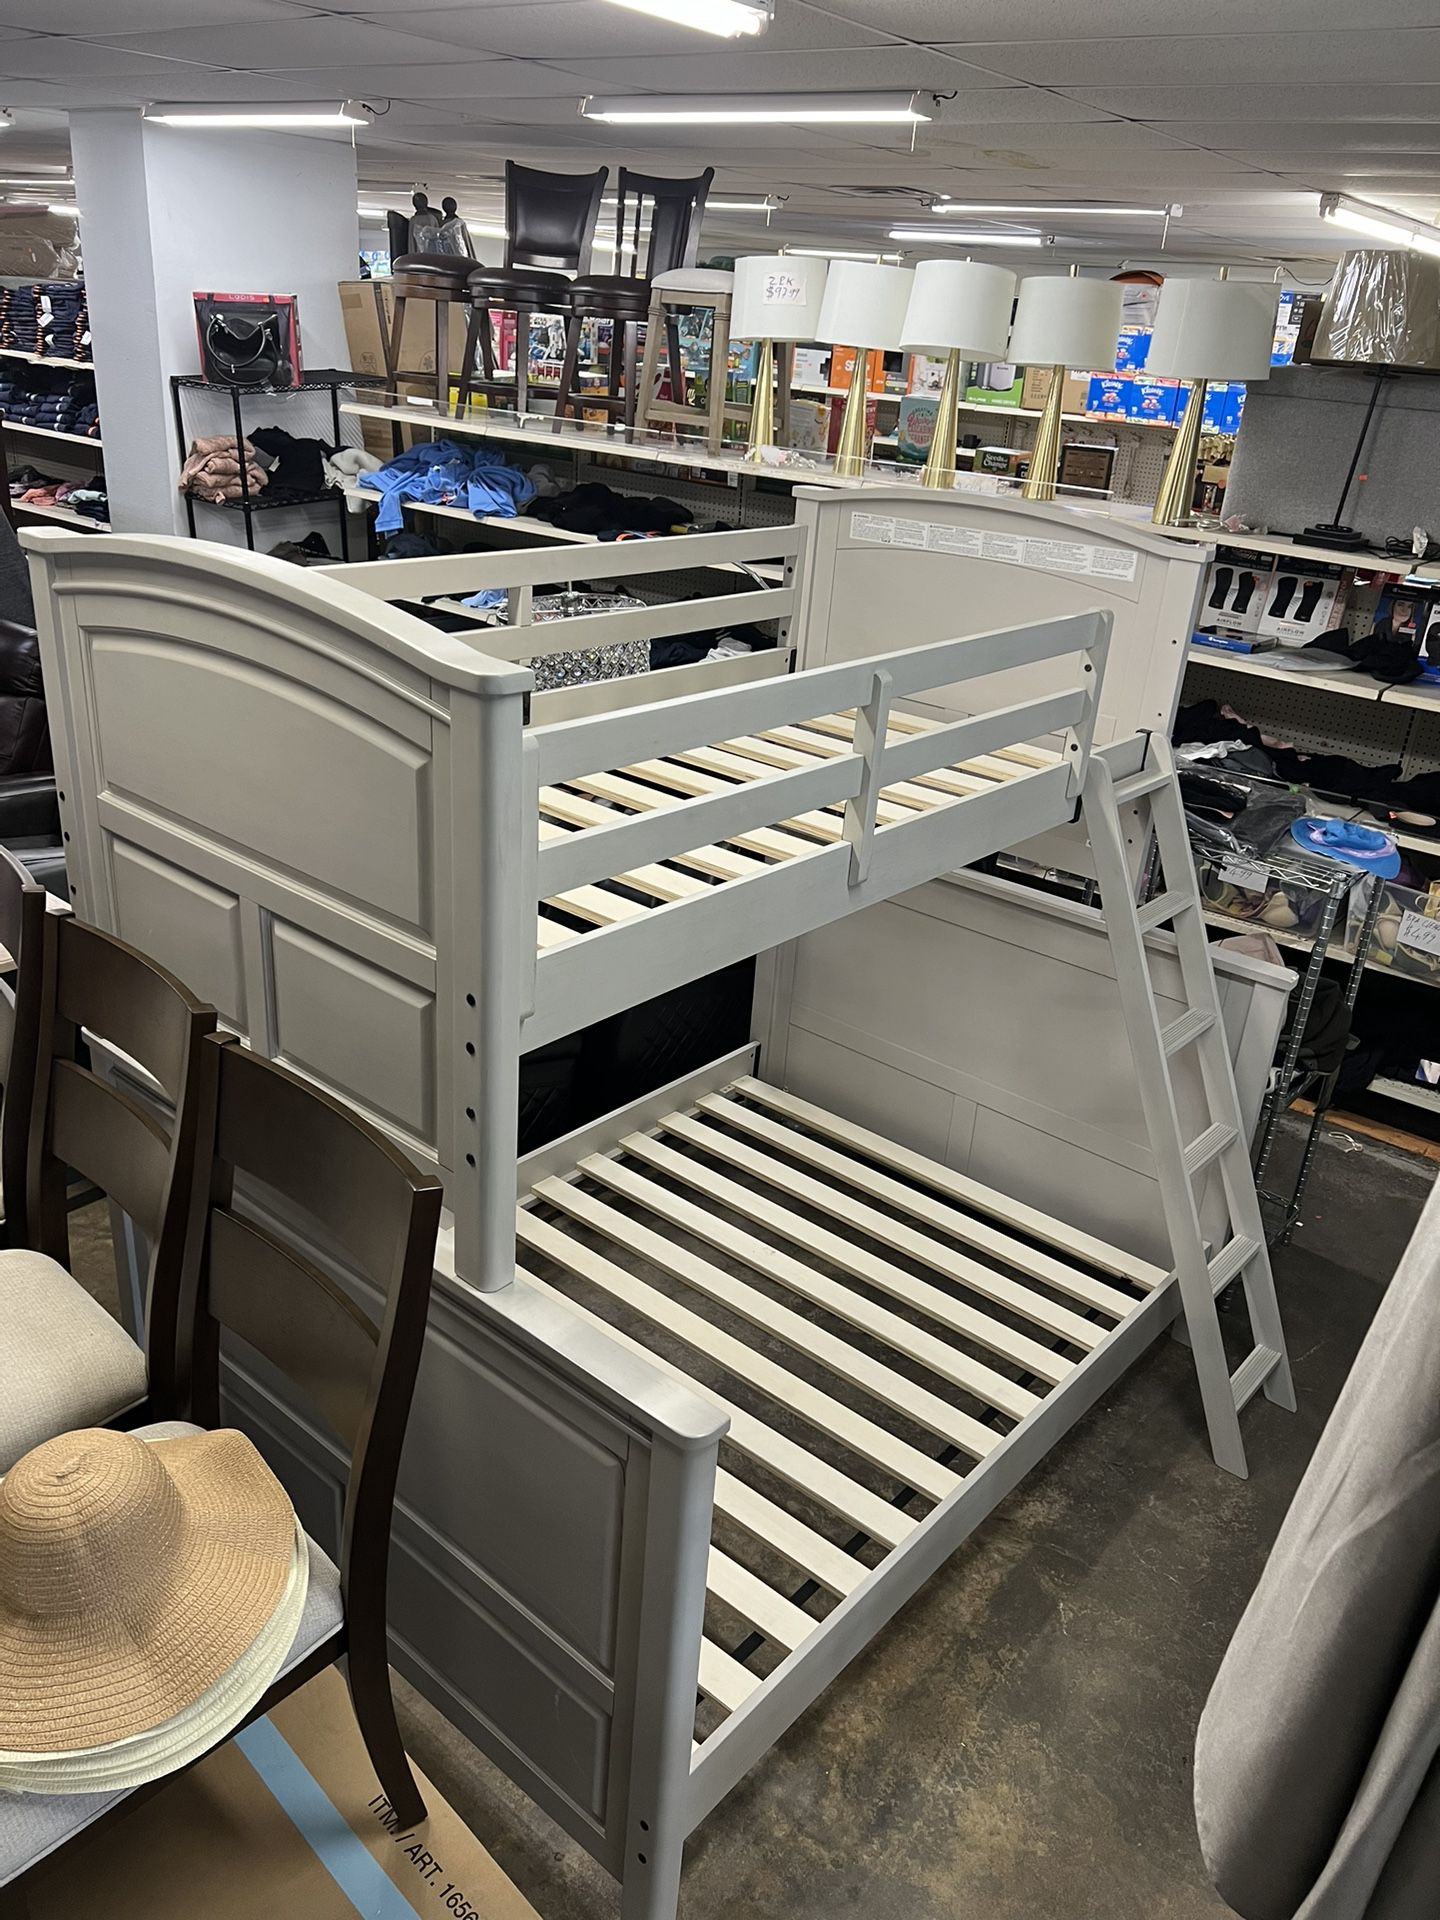 Wingate Twin Over Full Bunk Bed